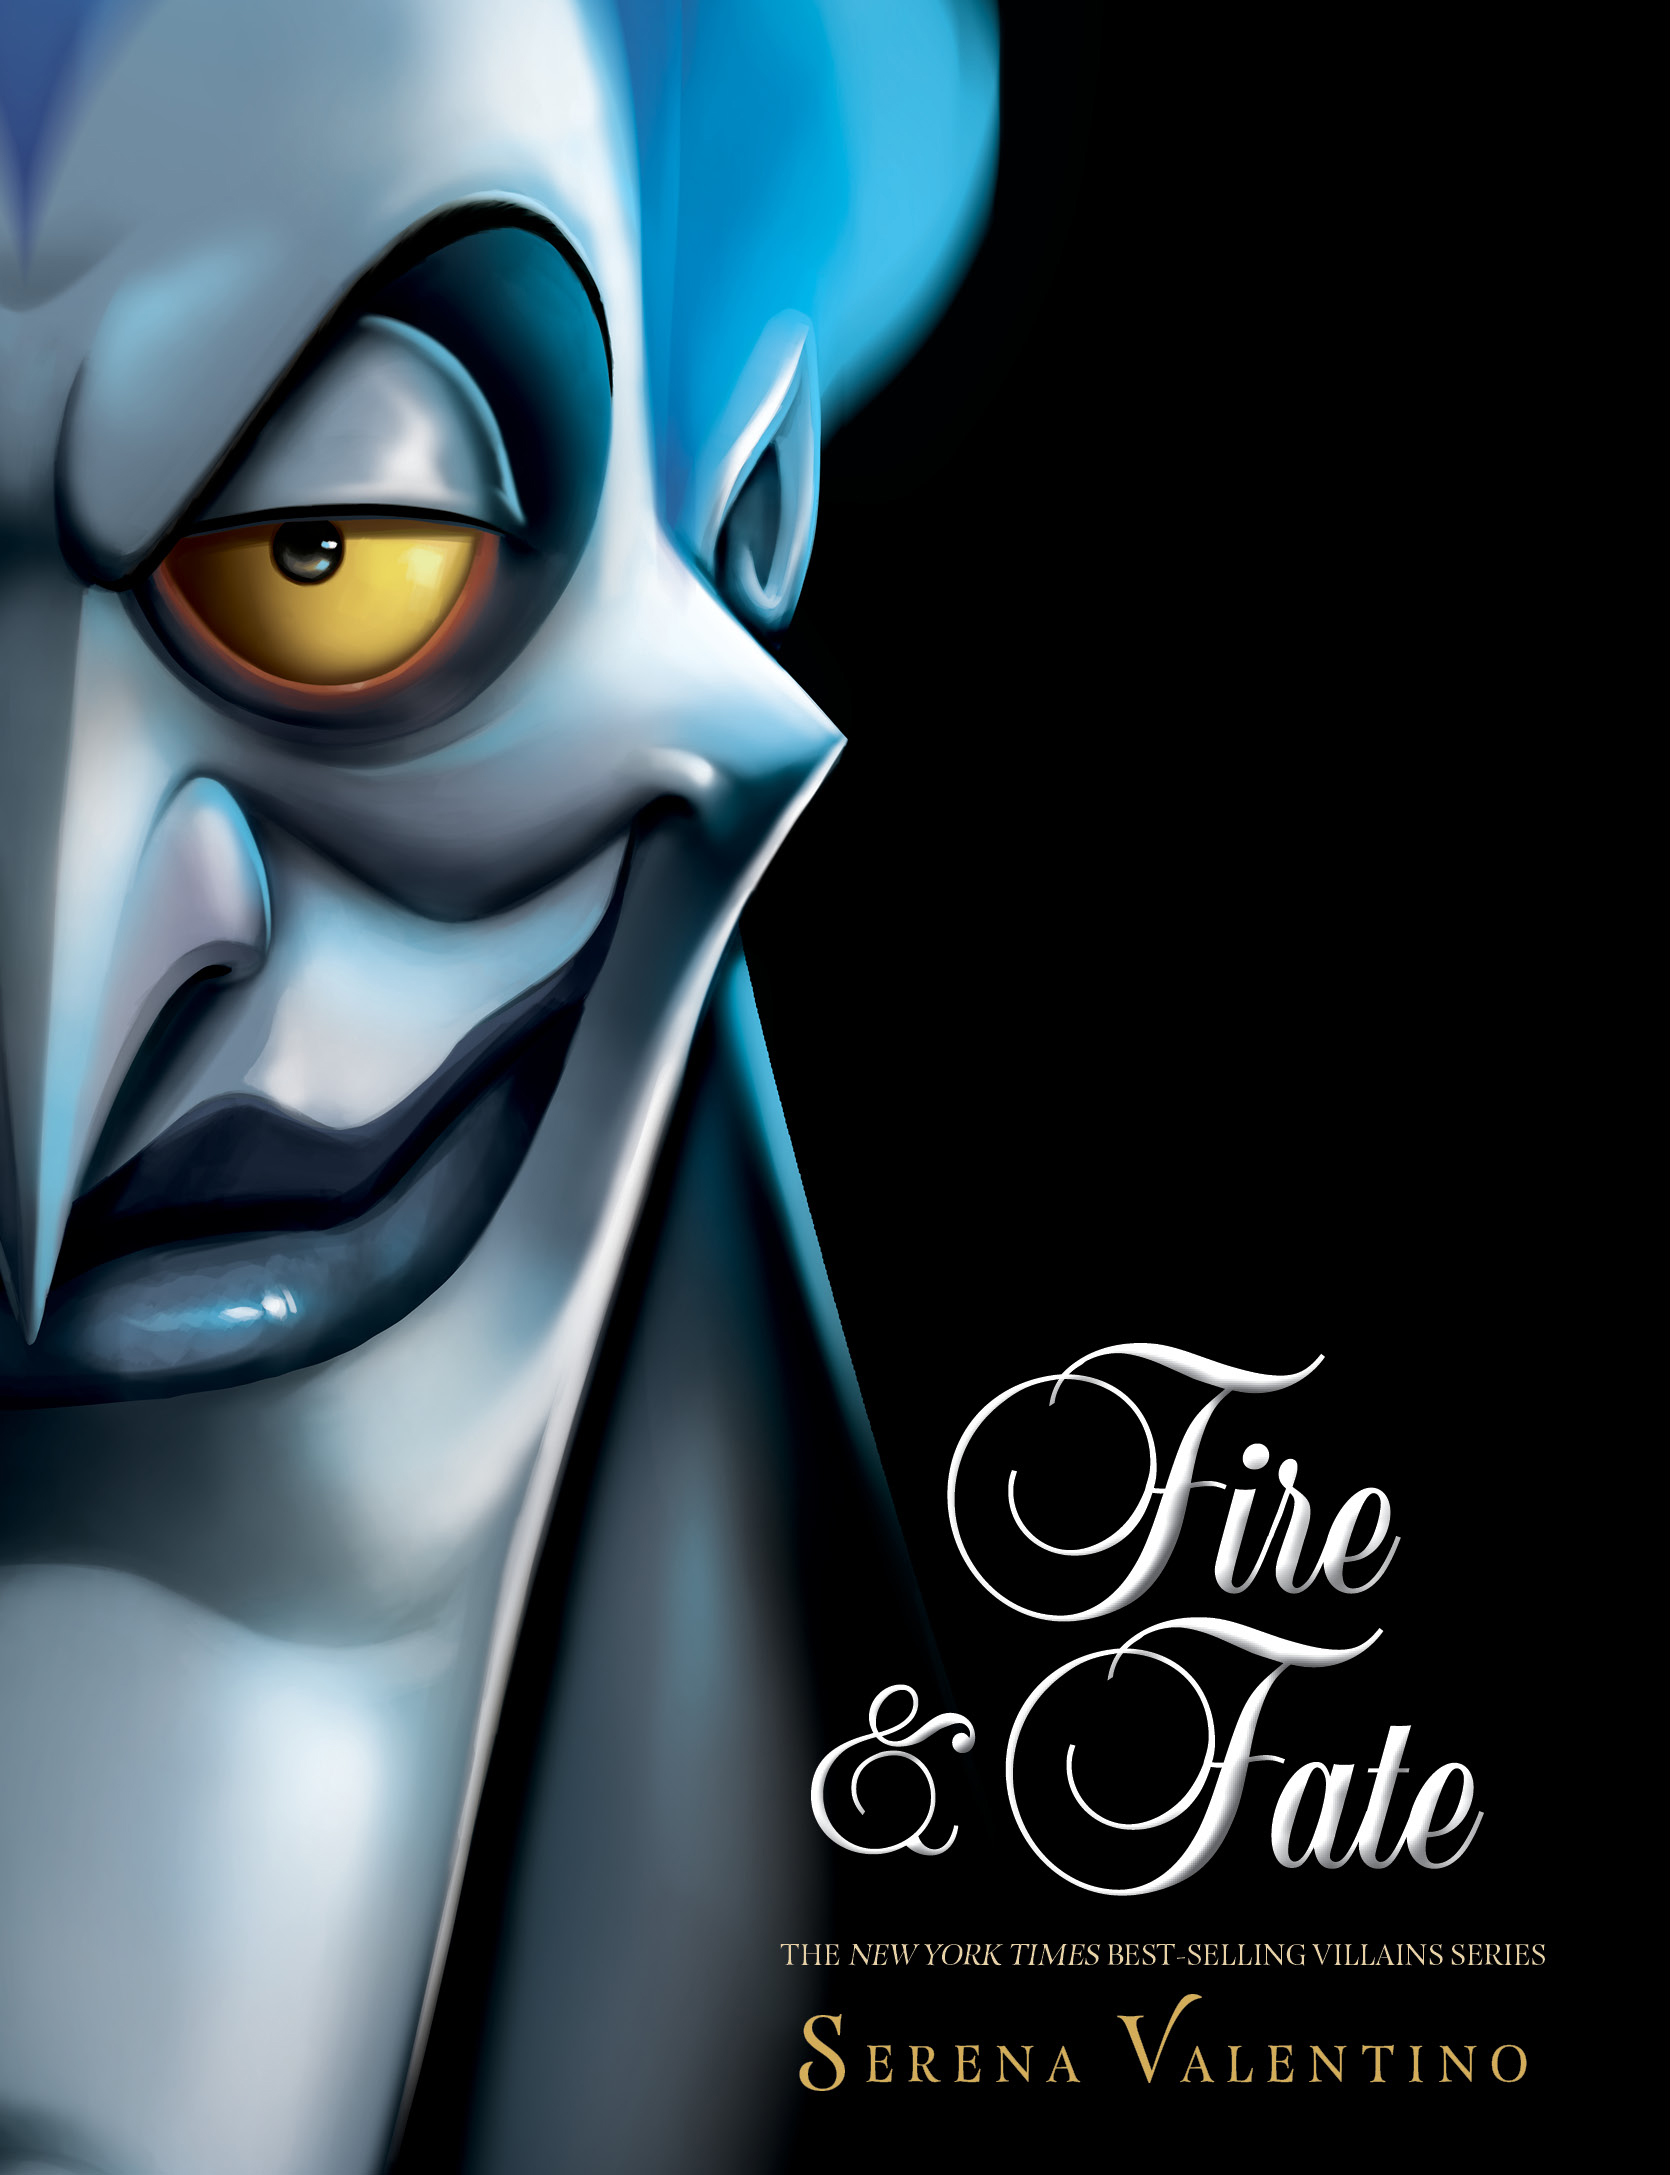 Fire and Fate by Serena Valentino   Villains   Disney Villains Books